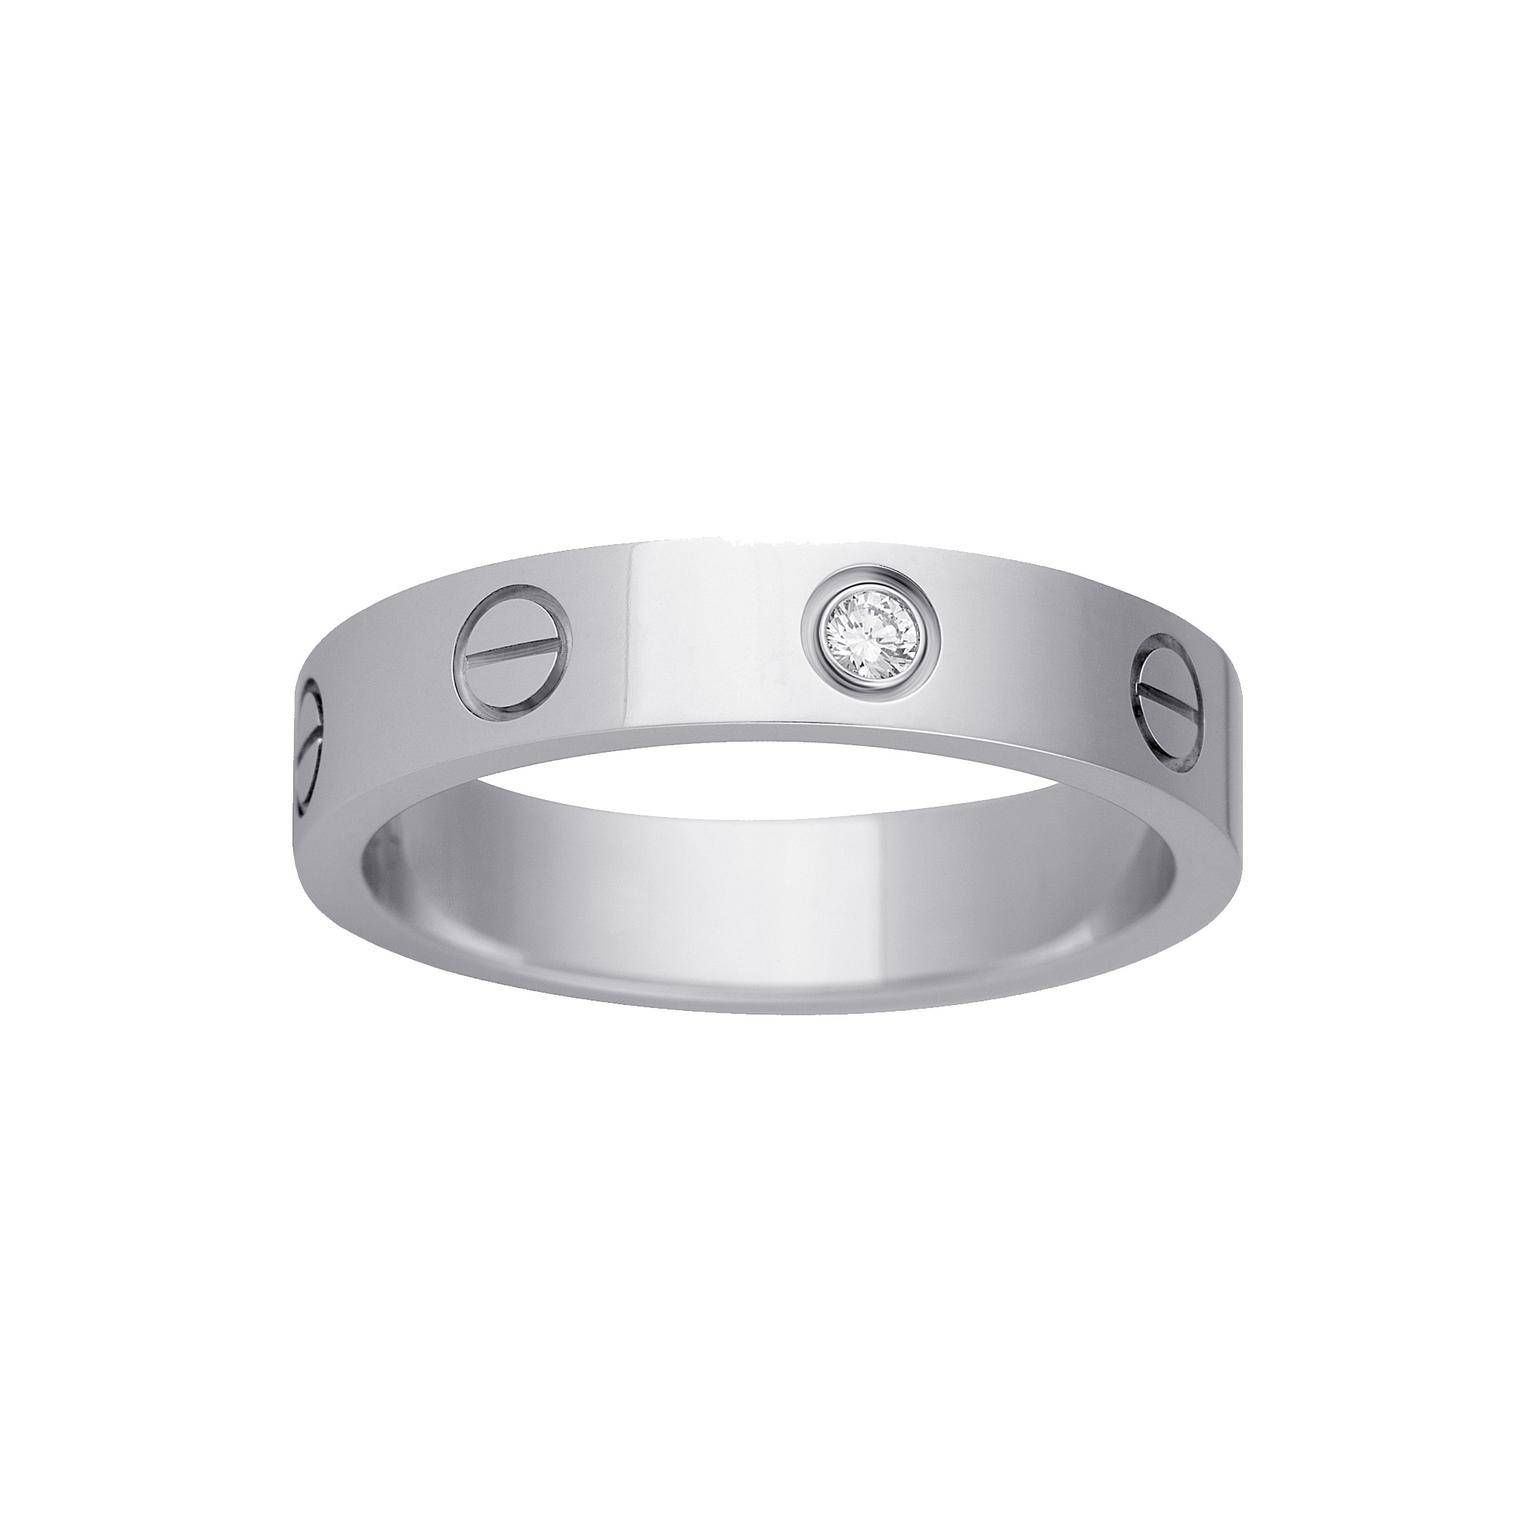 Love Platinum And Diamond Wedding Band | Cartier | The Jewellery Within Most Popular Mens Wedding Bands Platinum With Diamonds (View 10 of 15)